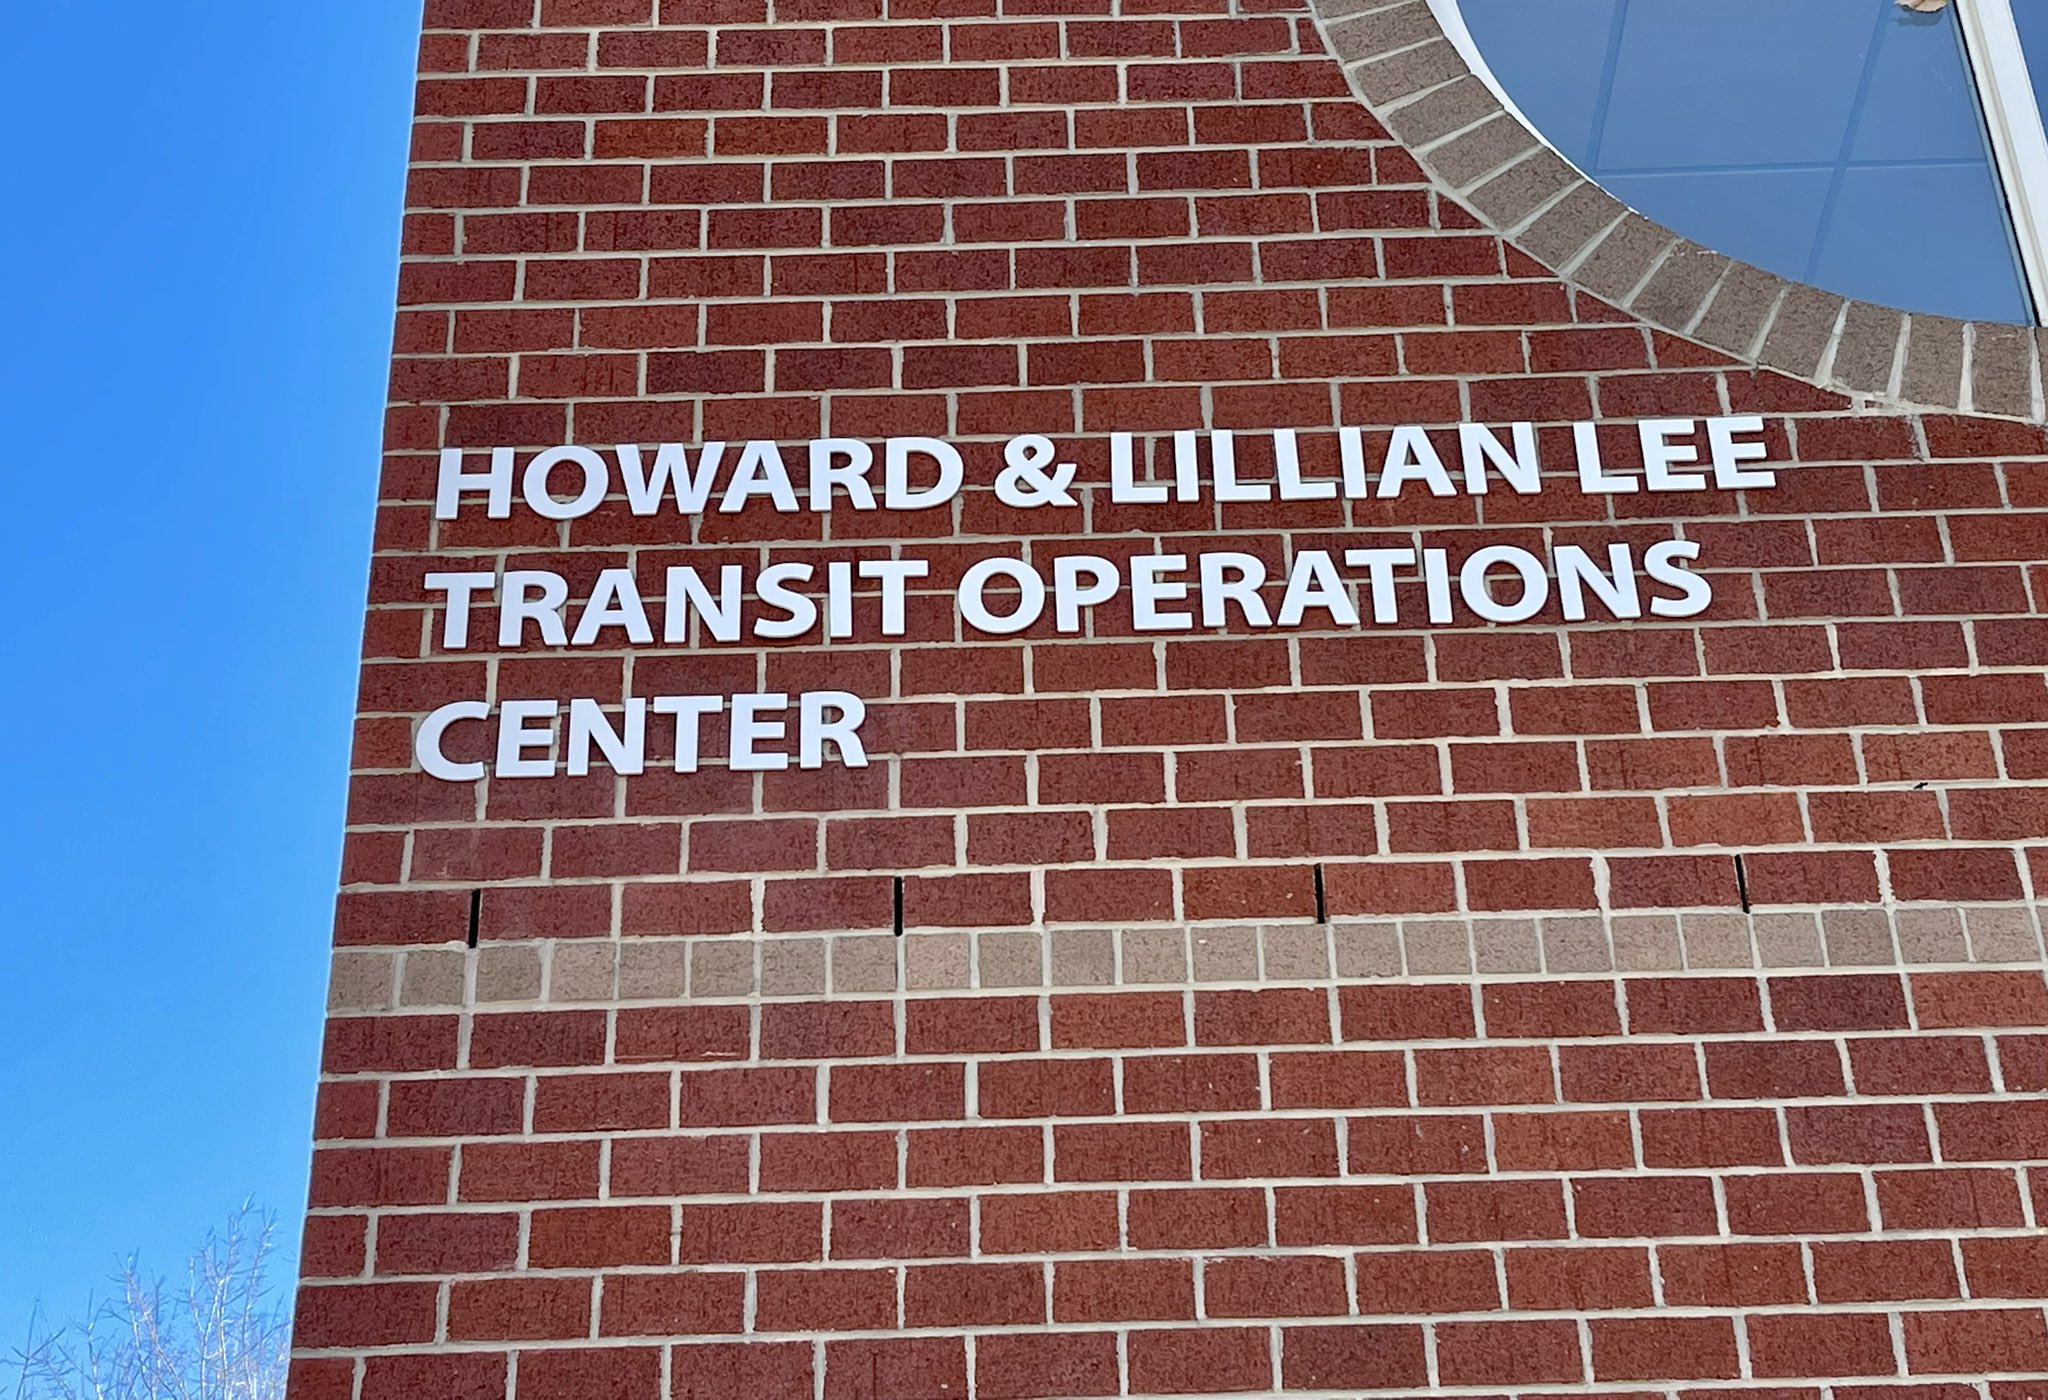 howard-and-lillian-lee-transit-operations-center